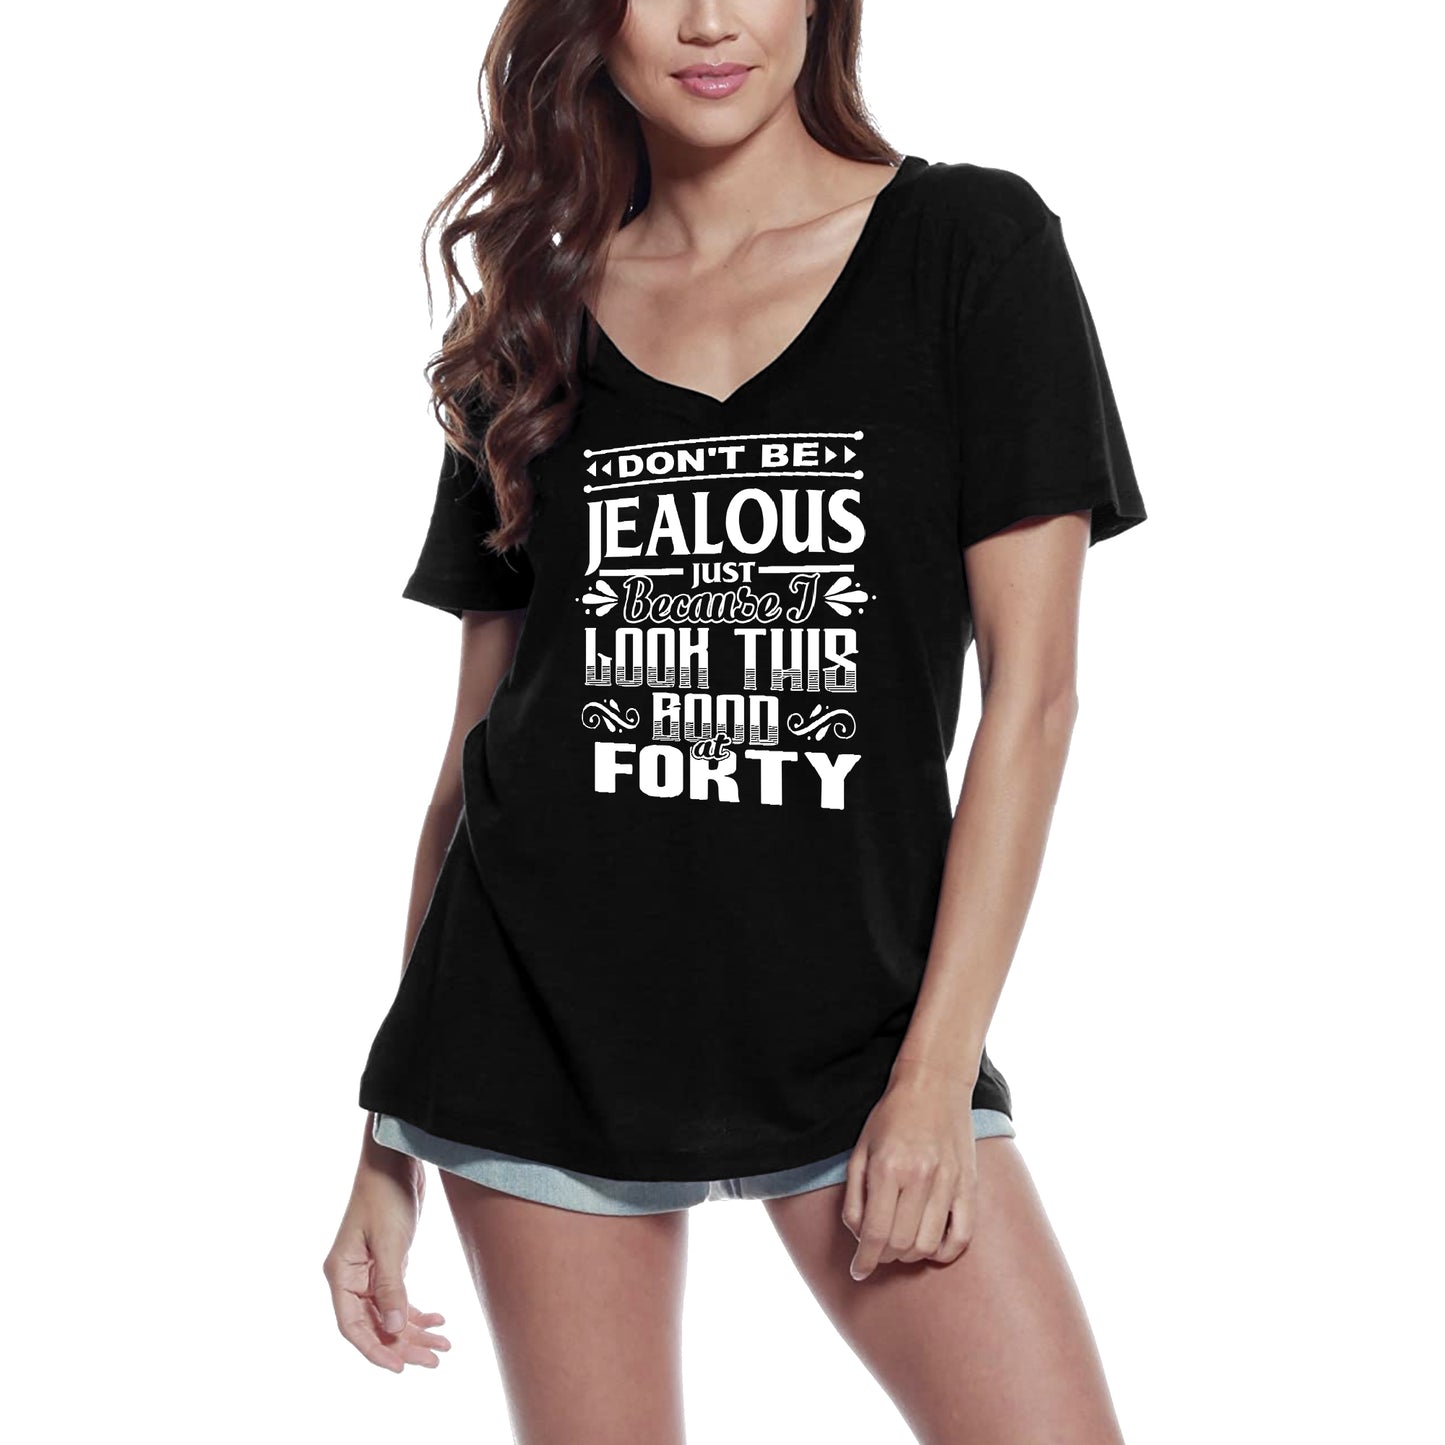 ULTRABASIC Women's T-Shirt Don't Be Jealous Just Because I Look This Good at Forty - 40th Birthday Gift Tee Shirt